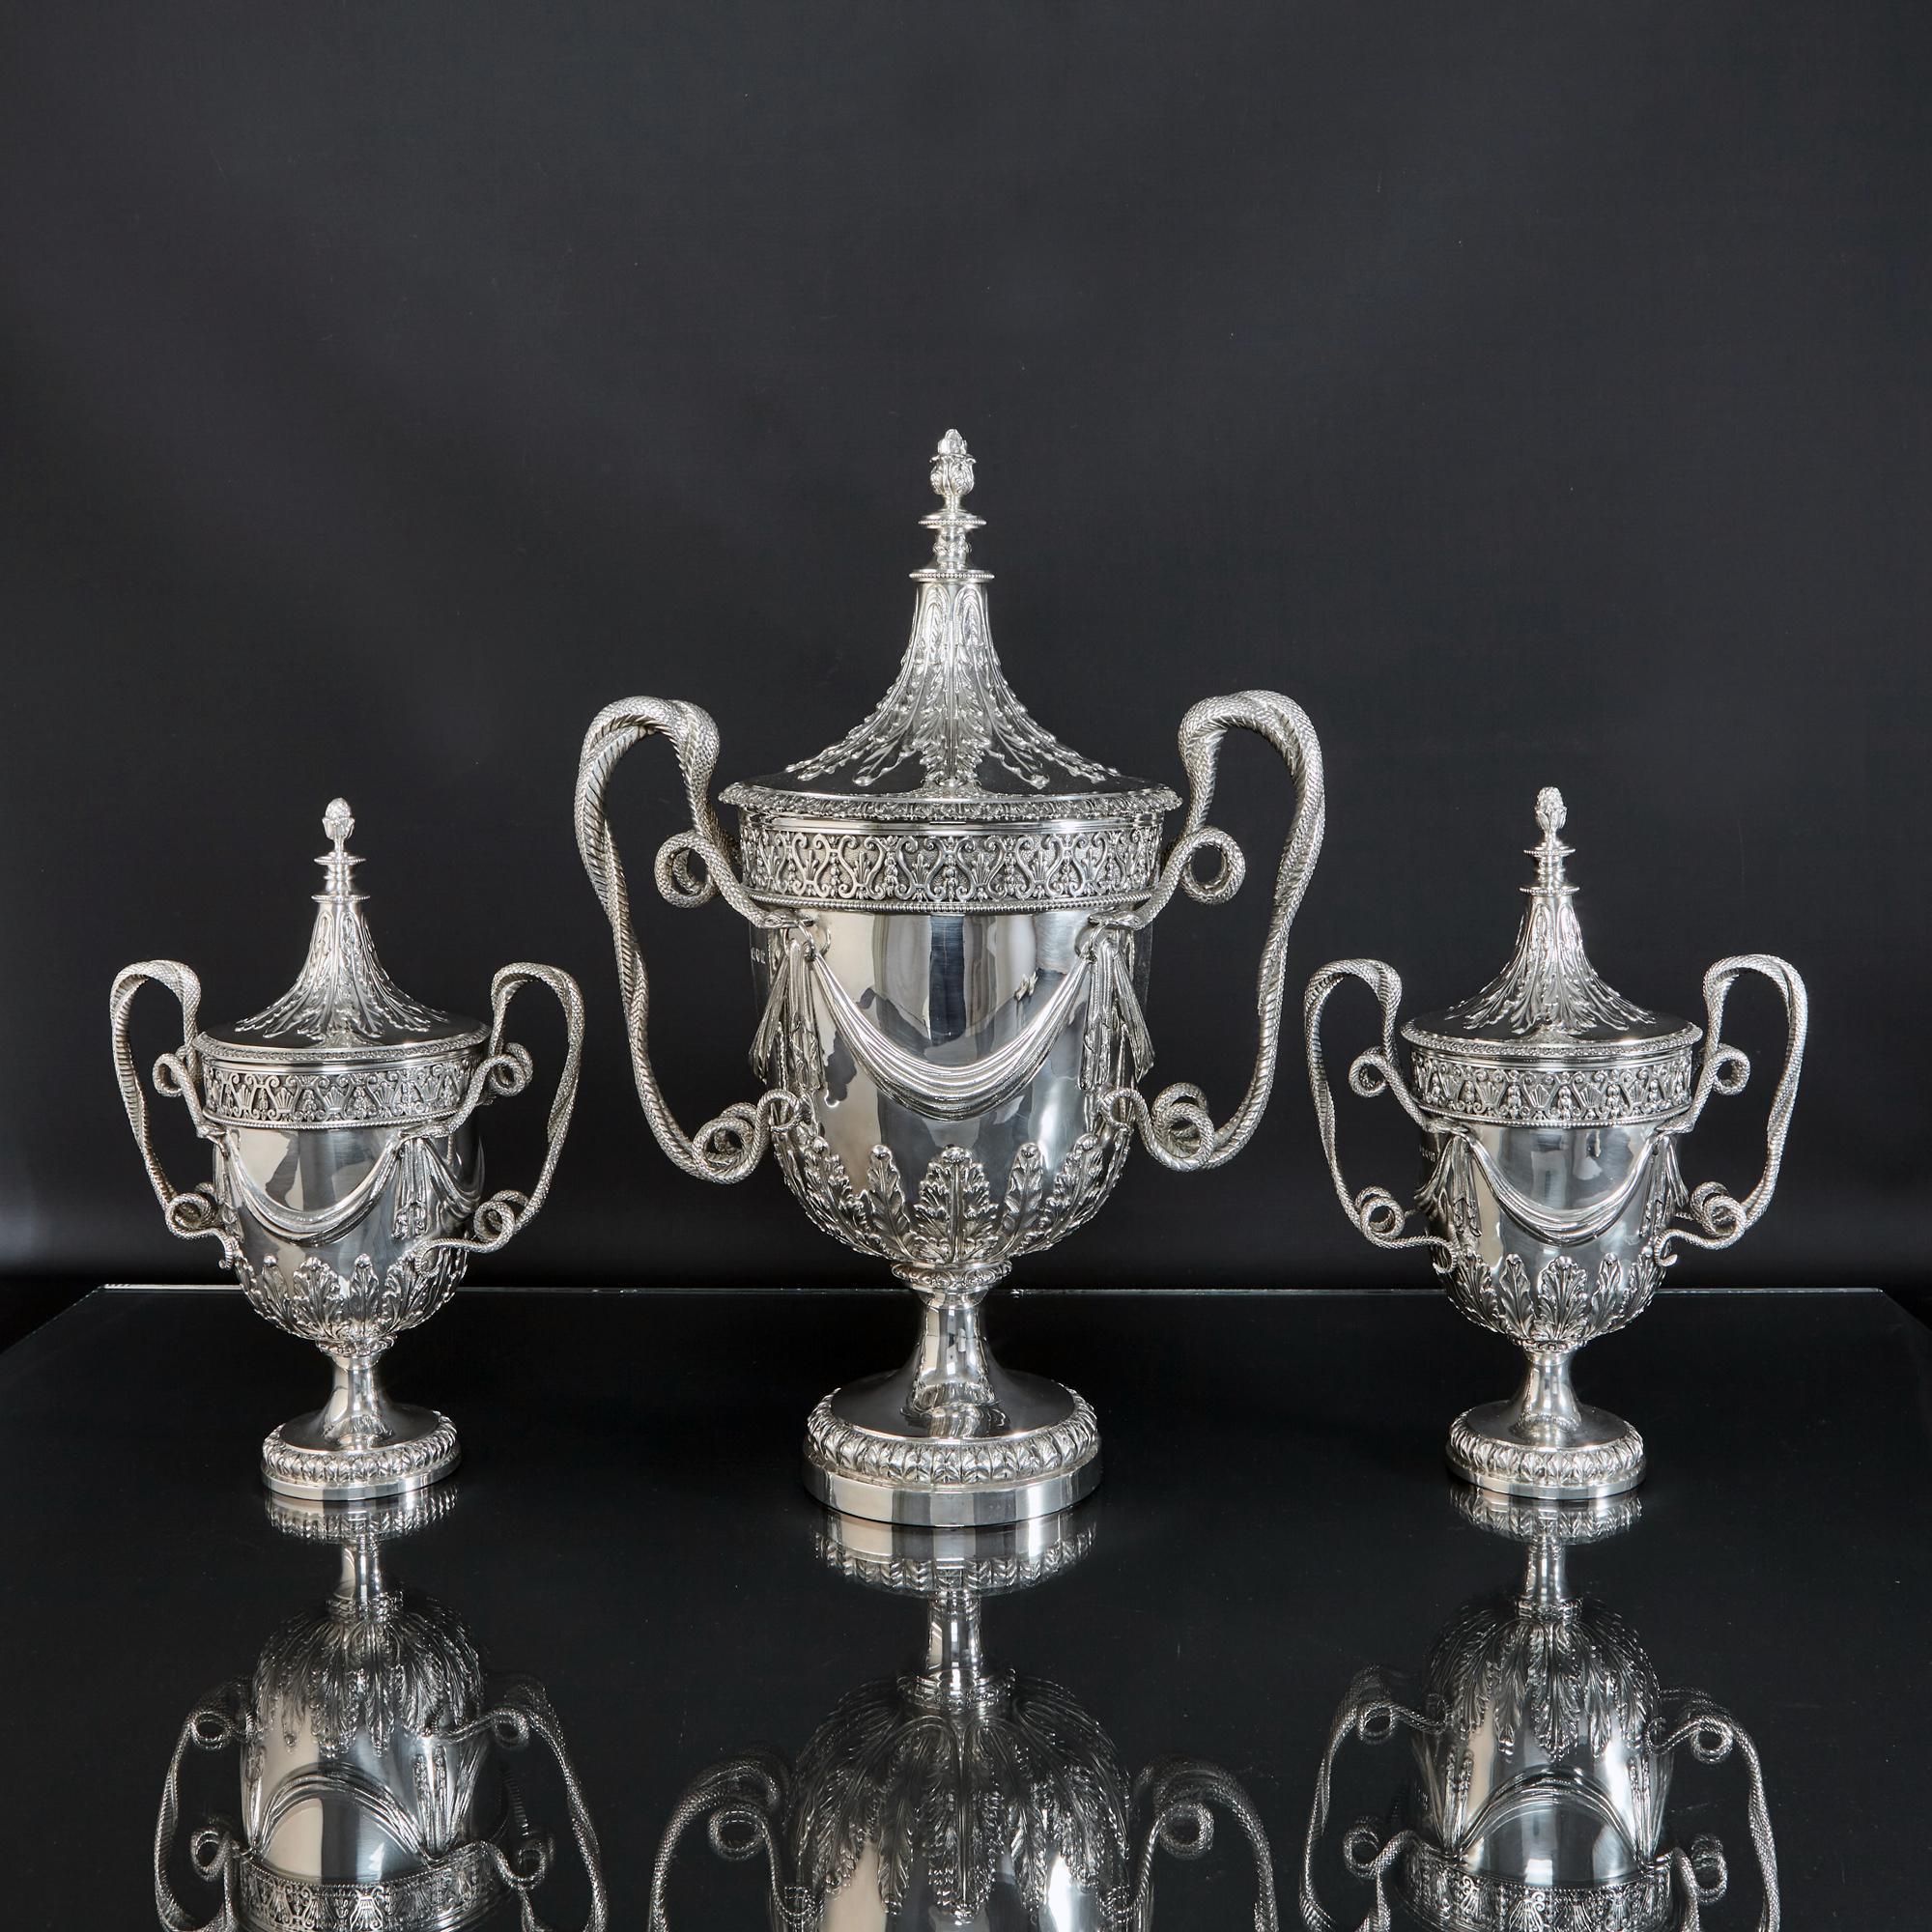 A spectacular set of three silver trophy cups in the George III style, one larger and a pair of smaller. Each has a removable lid with hand-chased acanthus leaf detail, a decoration which is also found round the bodies, and cast finial. The handles